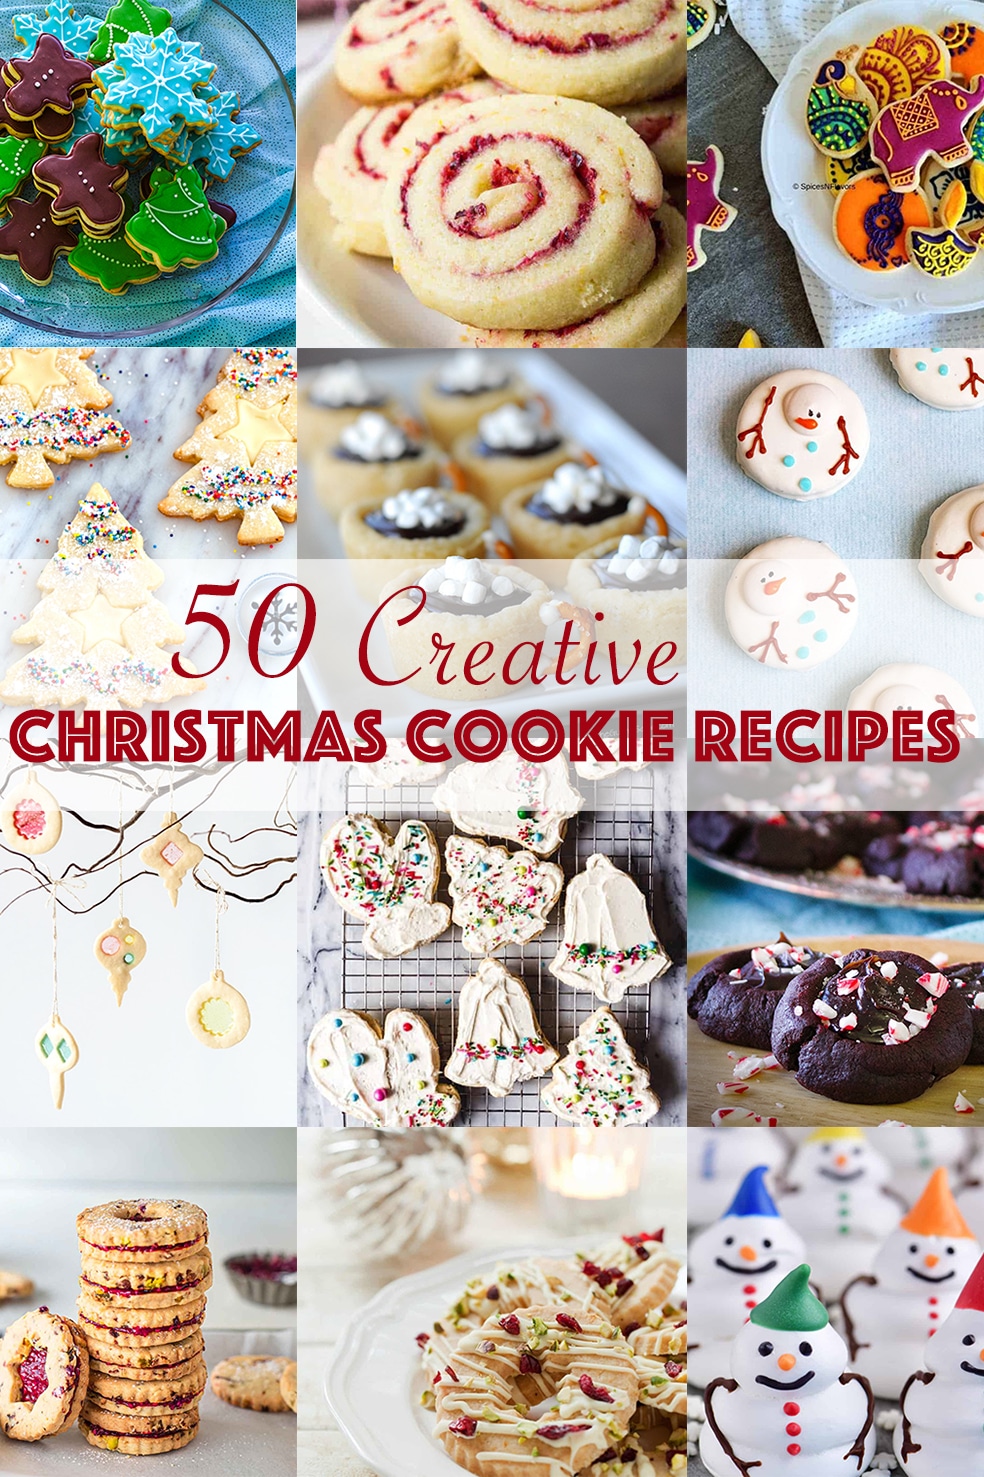 12 different photos showing different creative Christmas Cookie recipes.